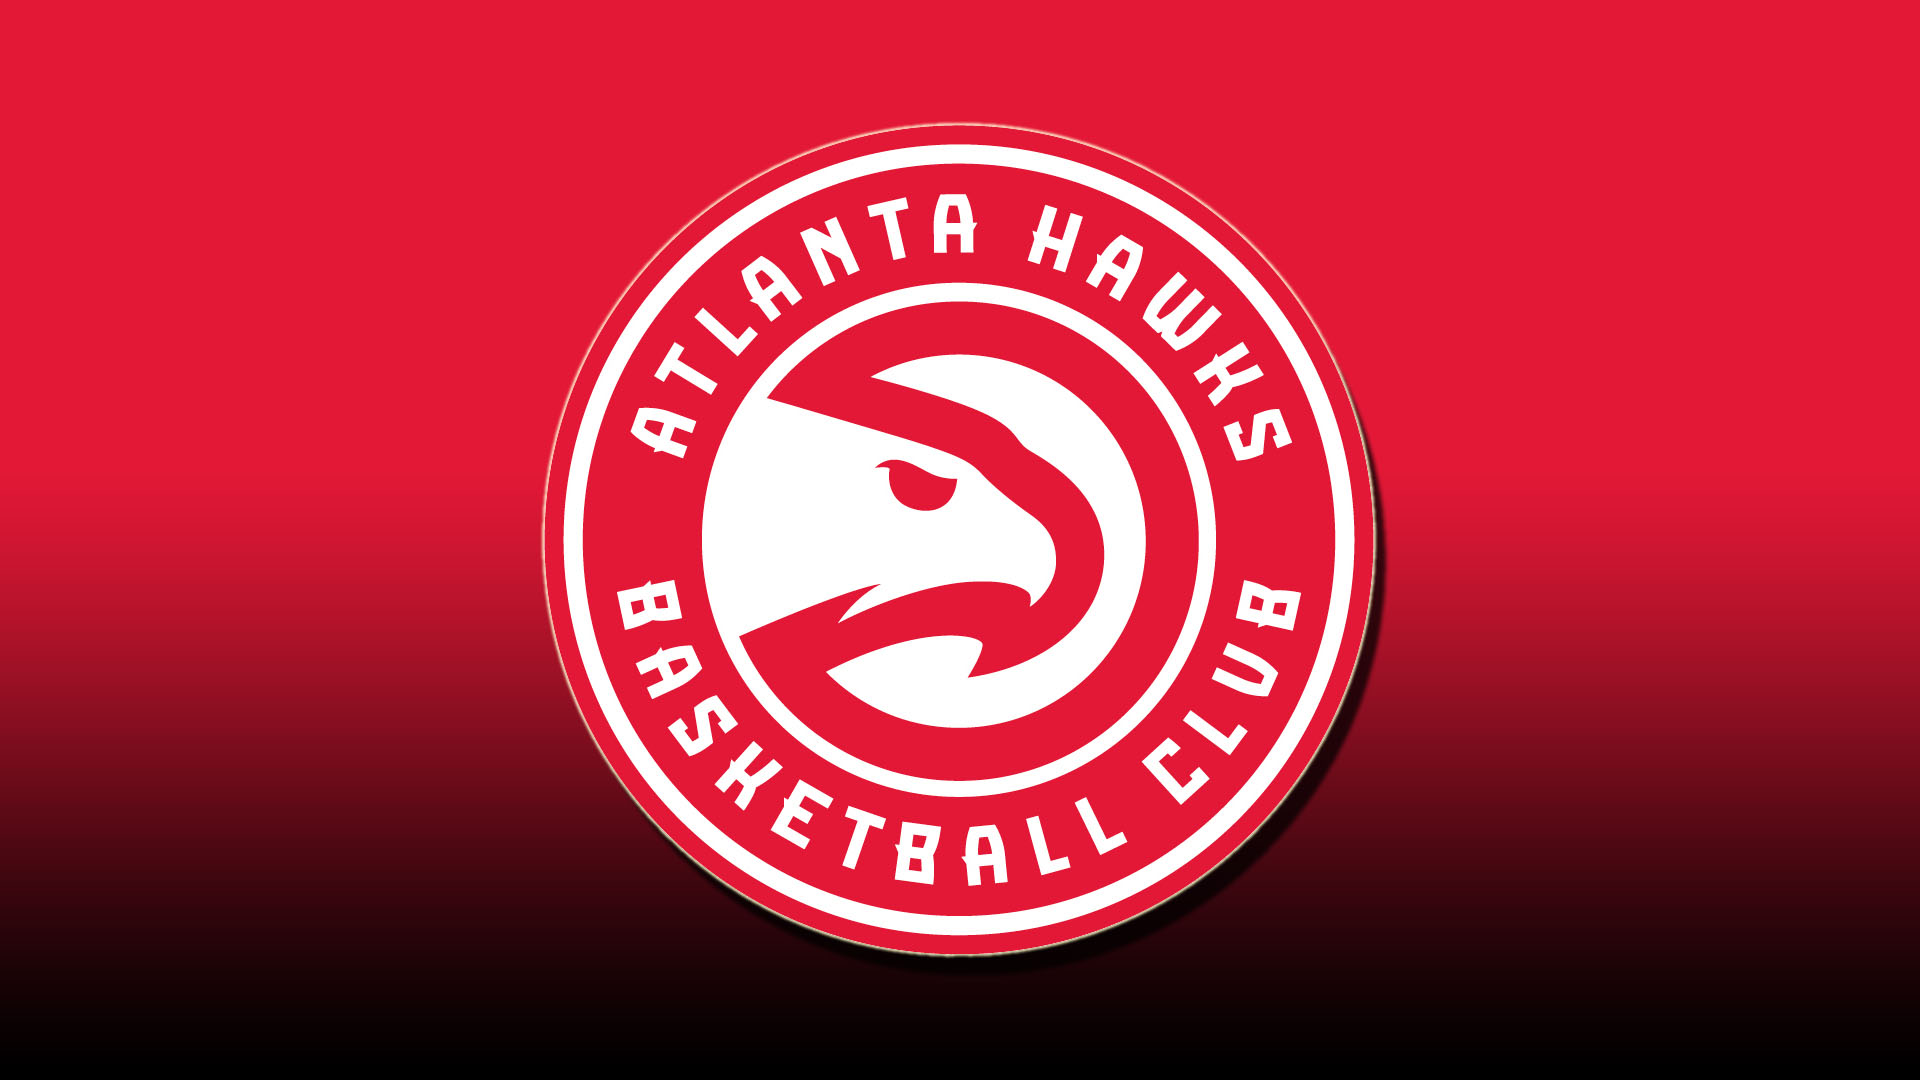 AP source: Hawks acquire Bey for 5 2nd-round draft picks - 41NBC